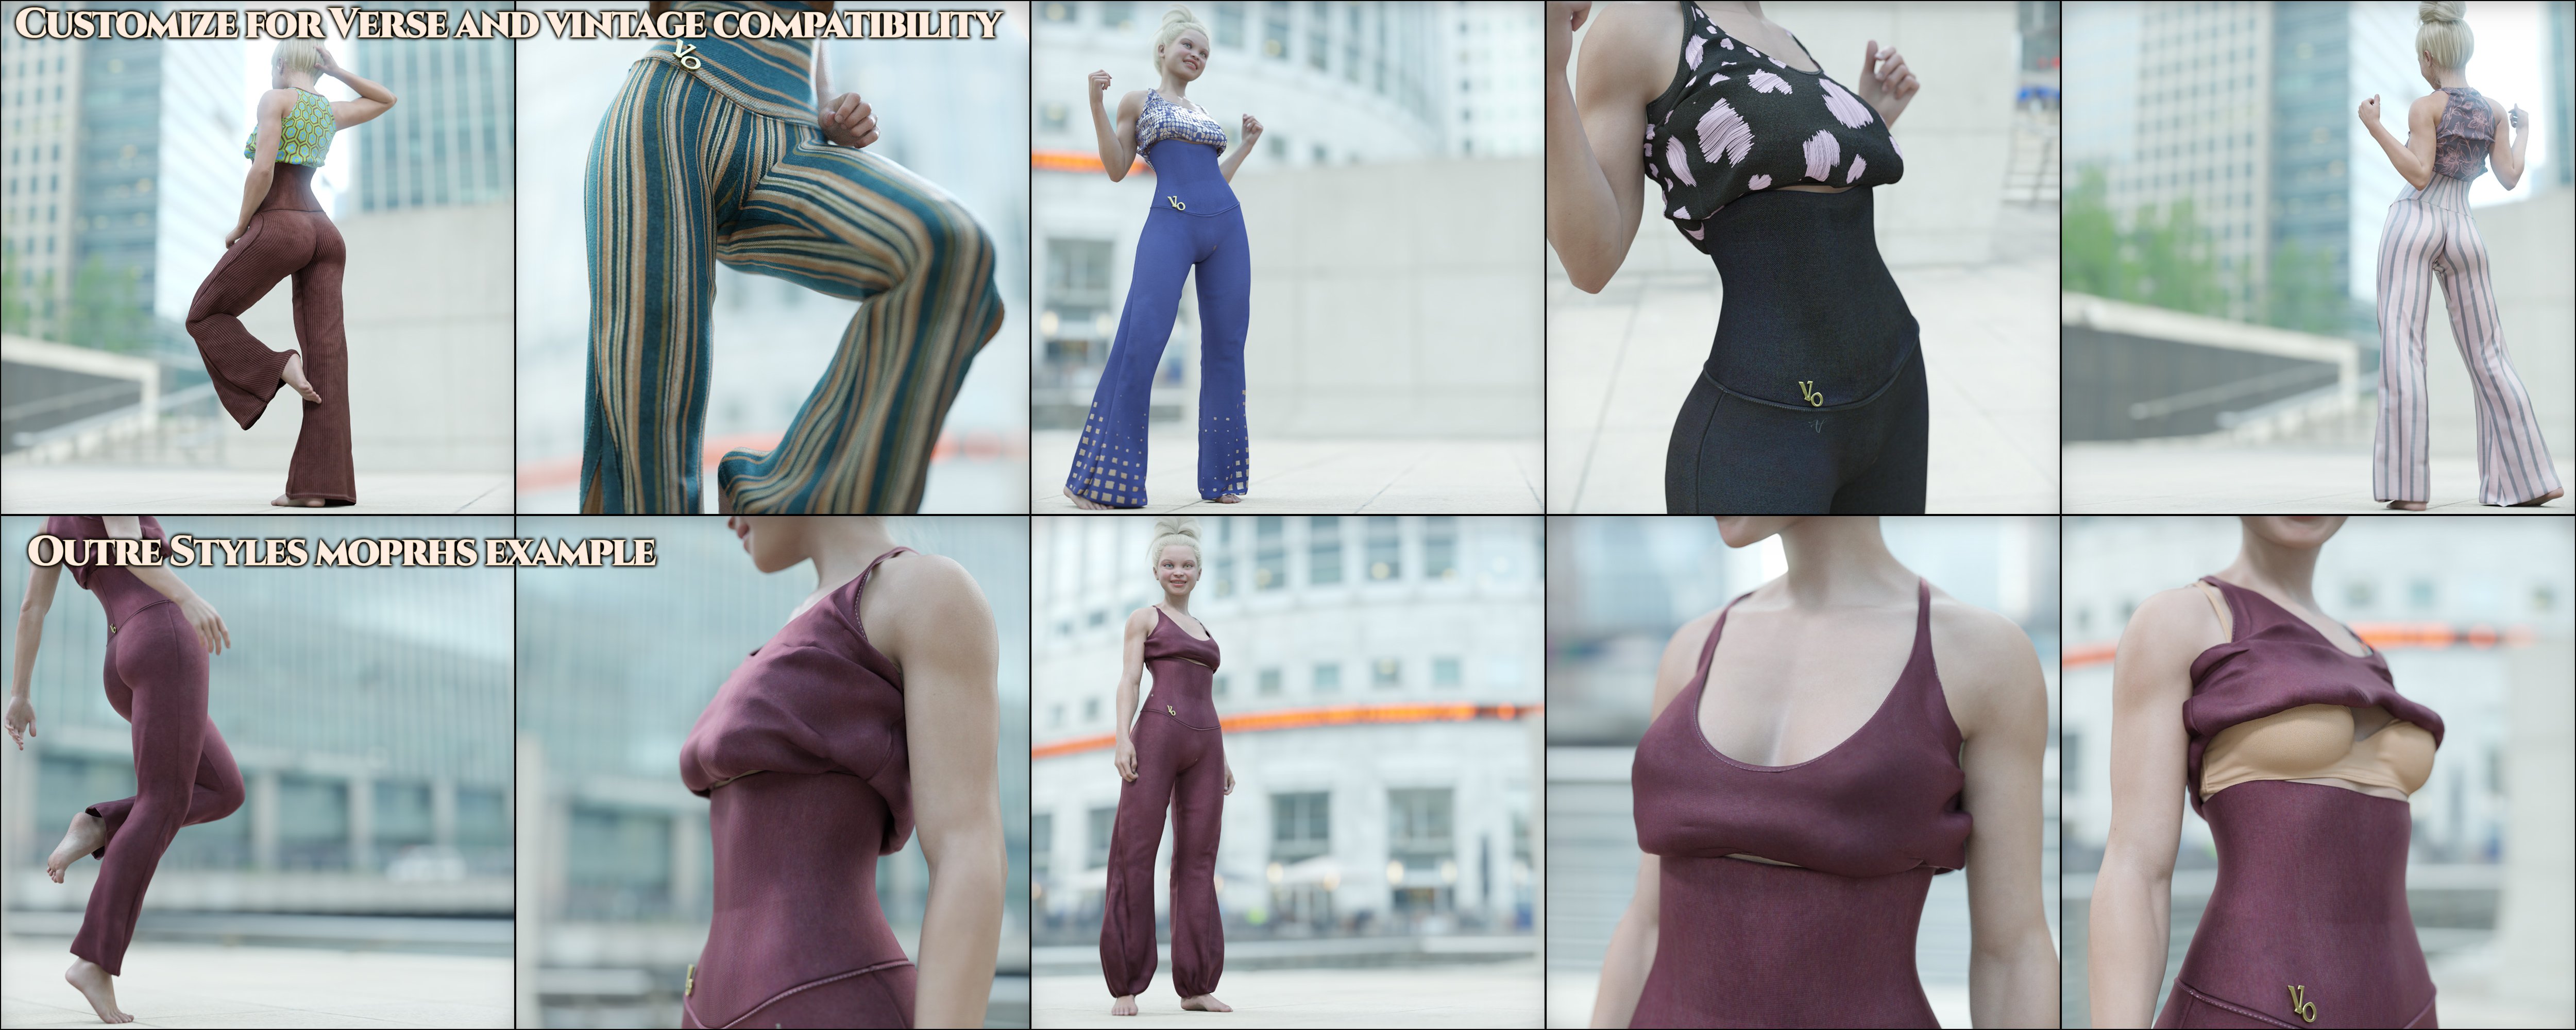 Verse Outre Outfit for Genesis 8 and 8.1 Females by: Aeon Soul, 3D Models by Daz 3D